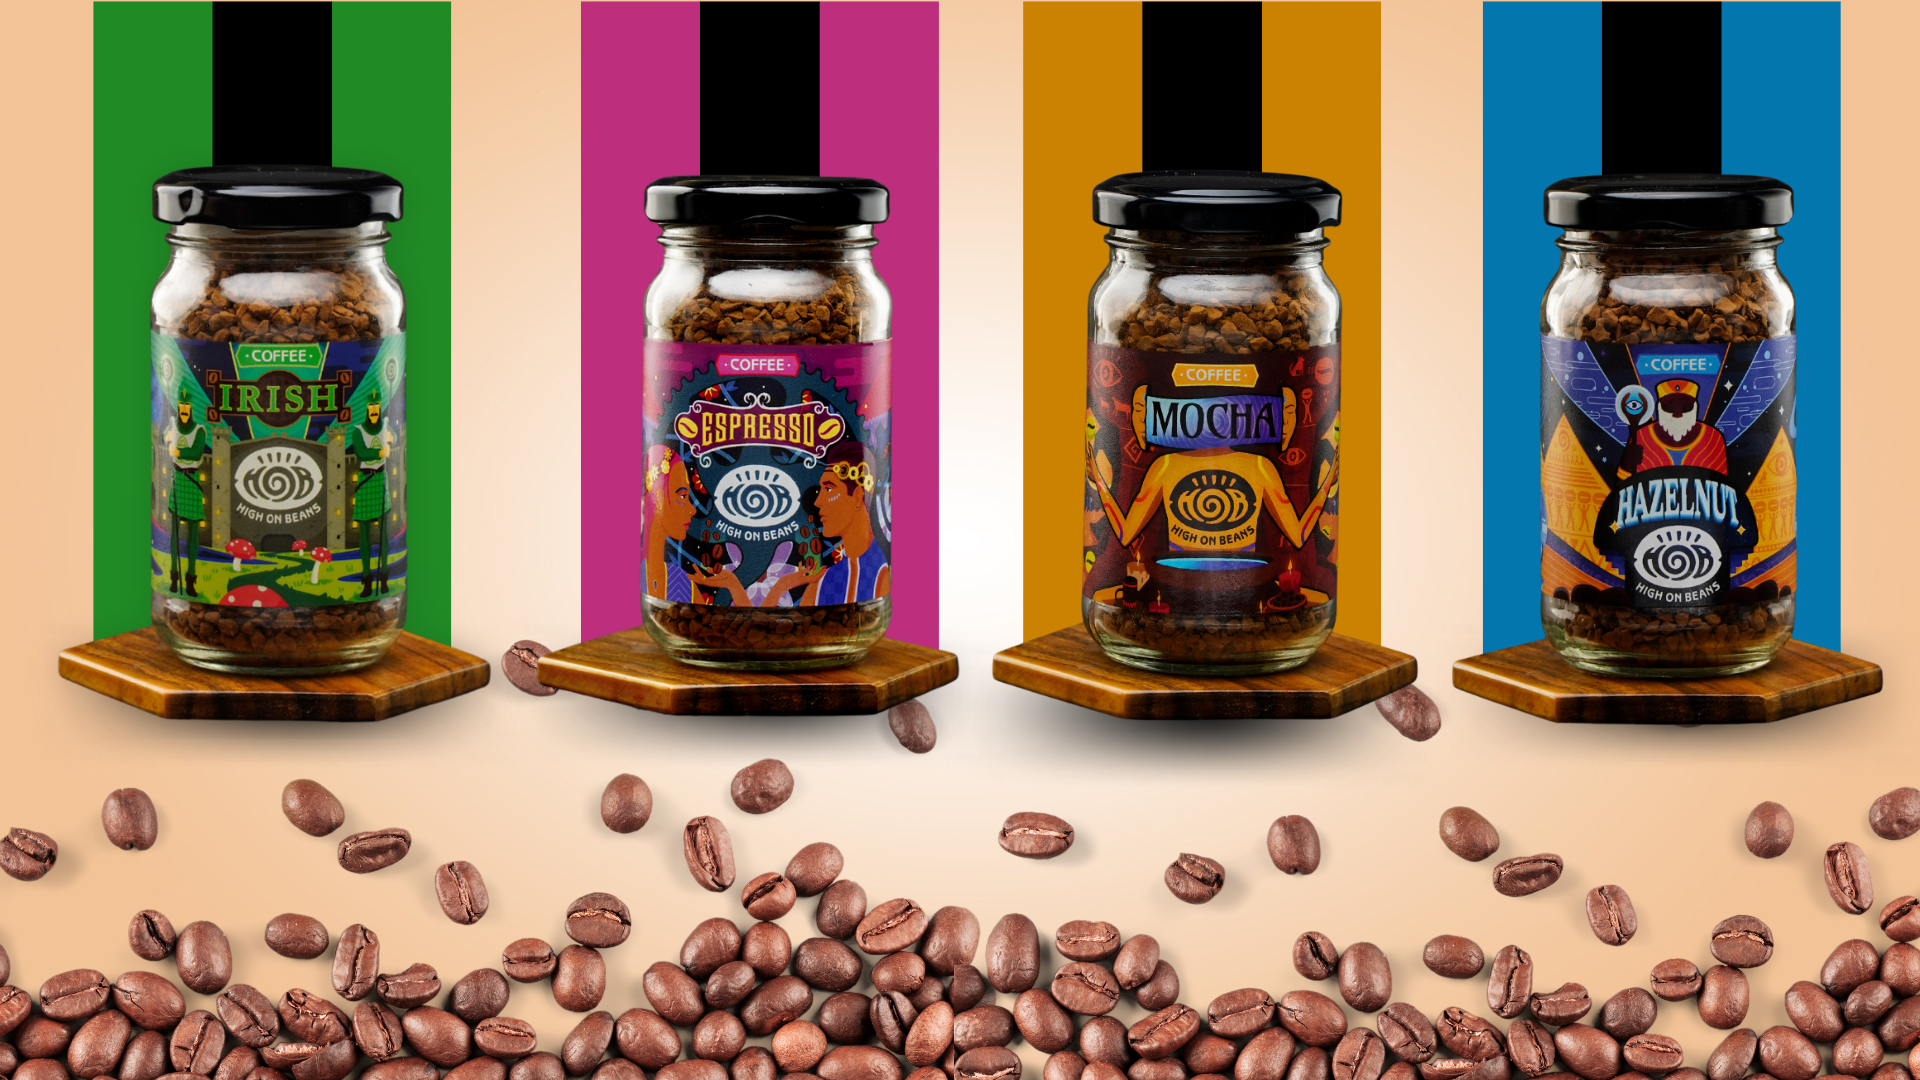 With the launch of the new coffee brand High On Beans, there is something exciting for all coffee lovers